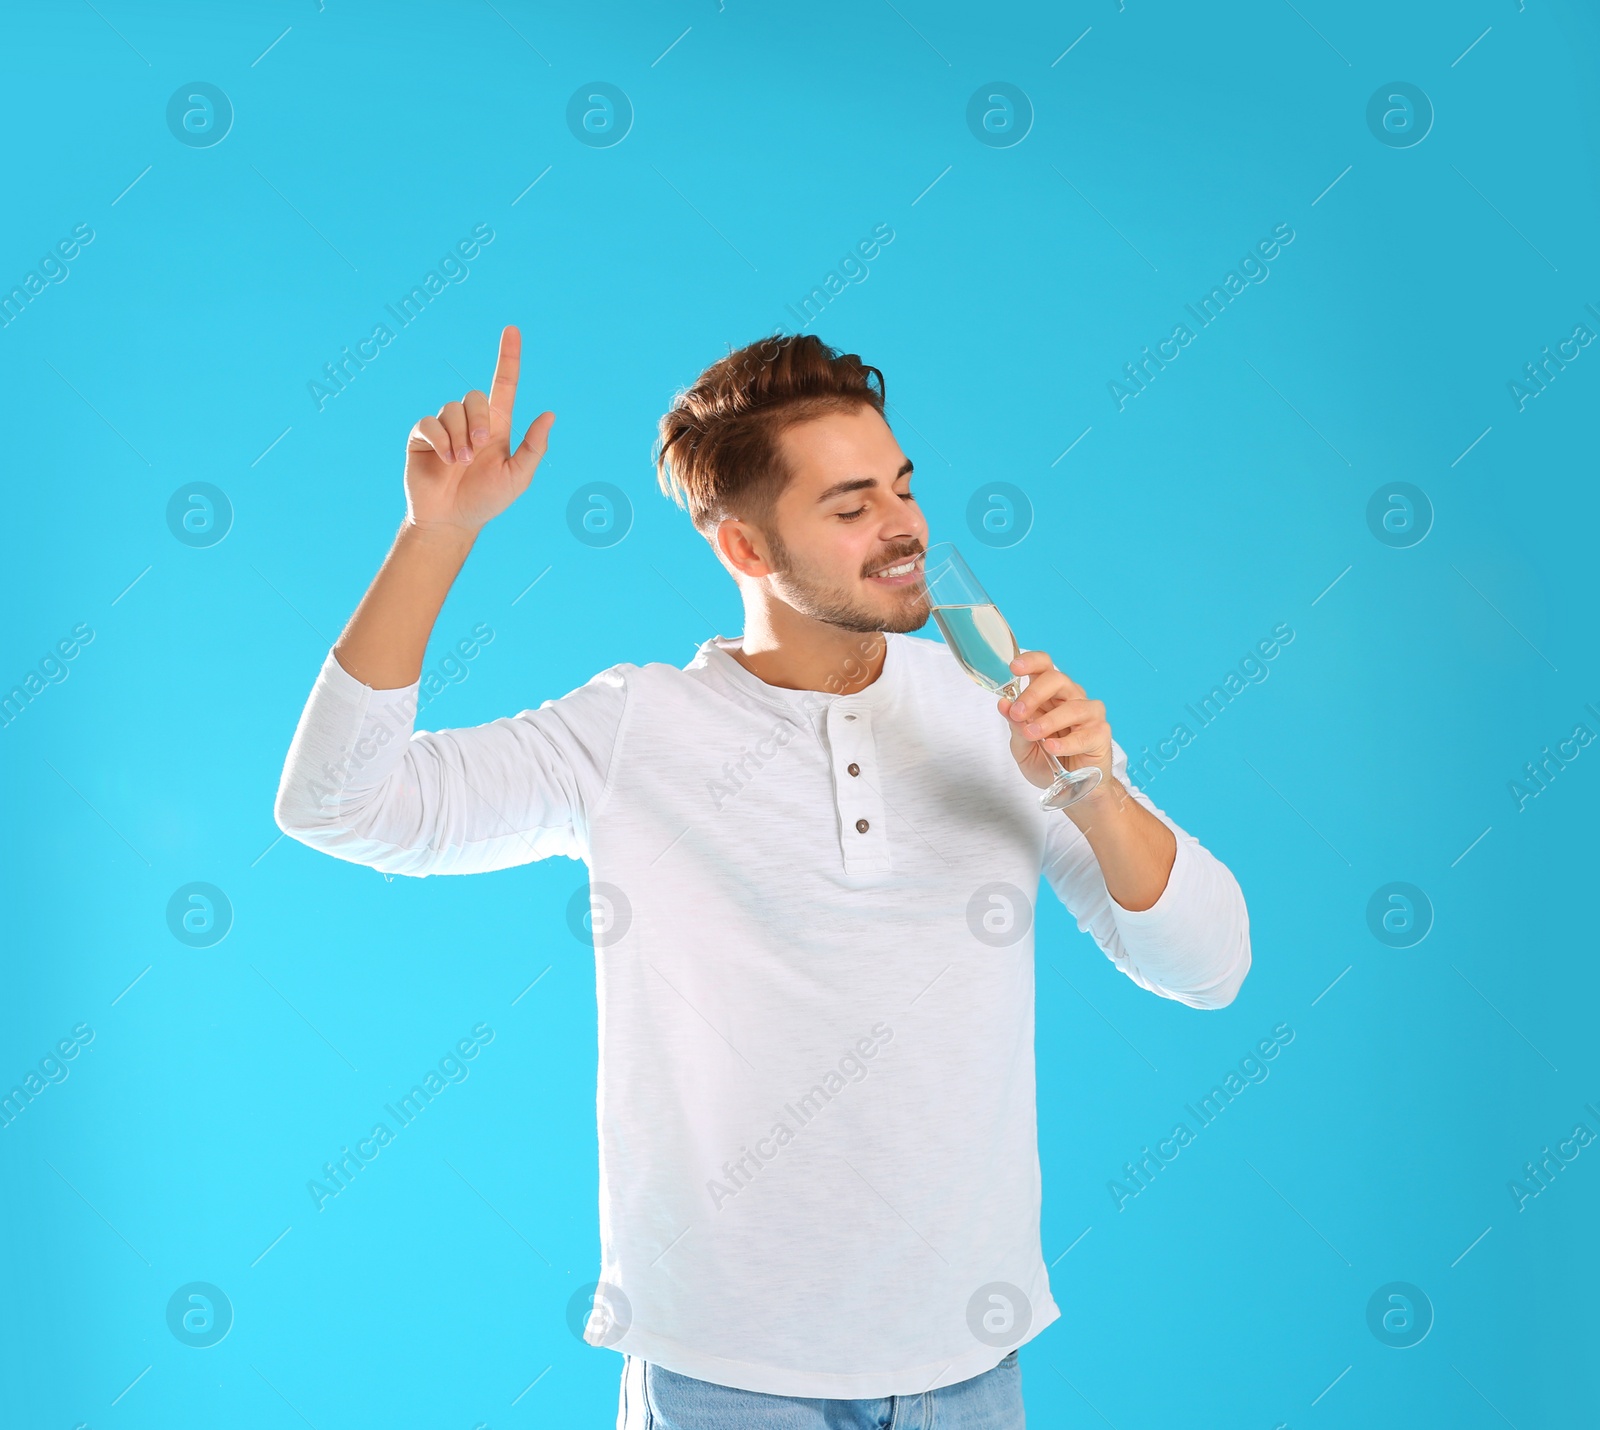 Photo of Portrait of happy man with champagne in glass on color background